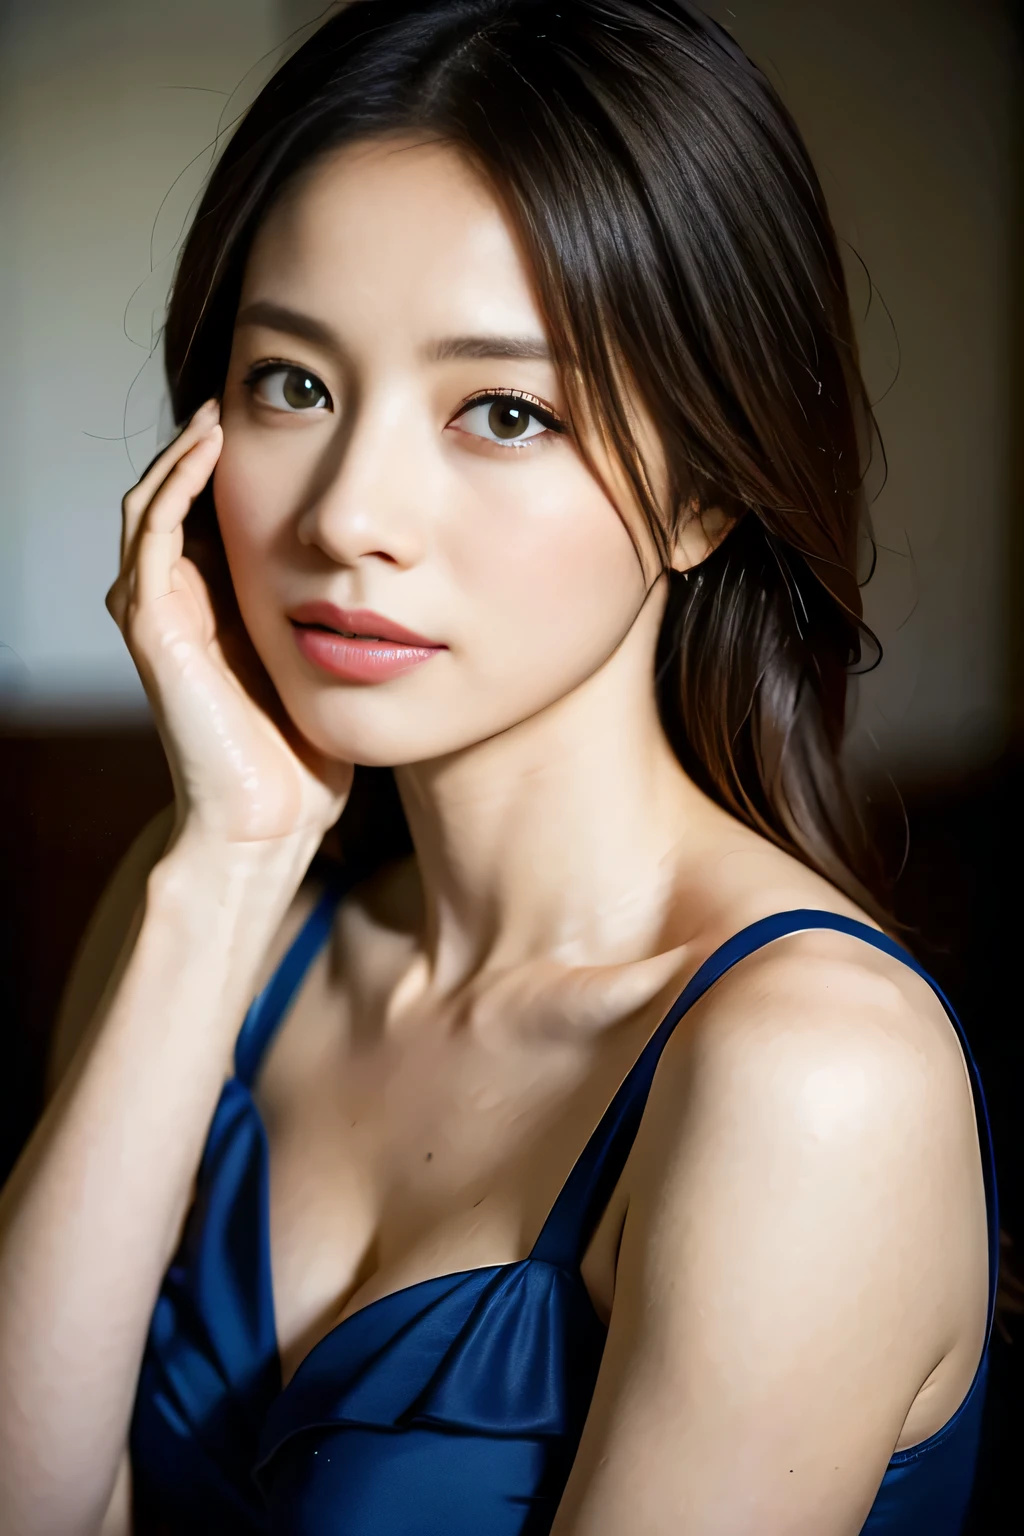 (highest quality,8K,masterpiece),anatomically correct,
Close-up of a woman in a blue dress with her hand on her face, beautiful korean woman, beautiful young japanese model,gorgeous young japanese woman, Cute girl - well-groomed face, beautiful portrait image, 60mm portrait, high quality portrait, 70mm Portrait, nice delicate face, feminine beautiful face, Beautiful woman,
big breasts,
